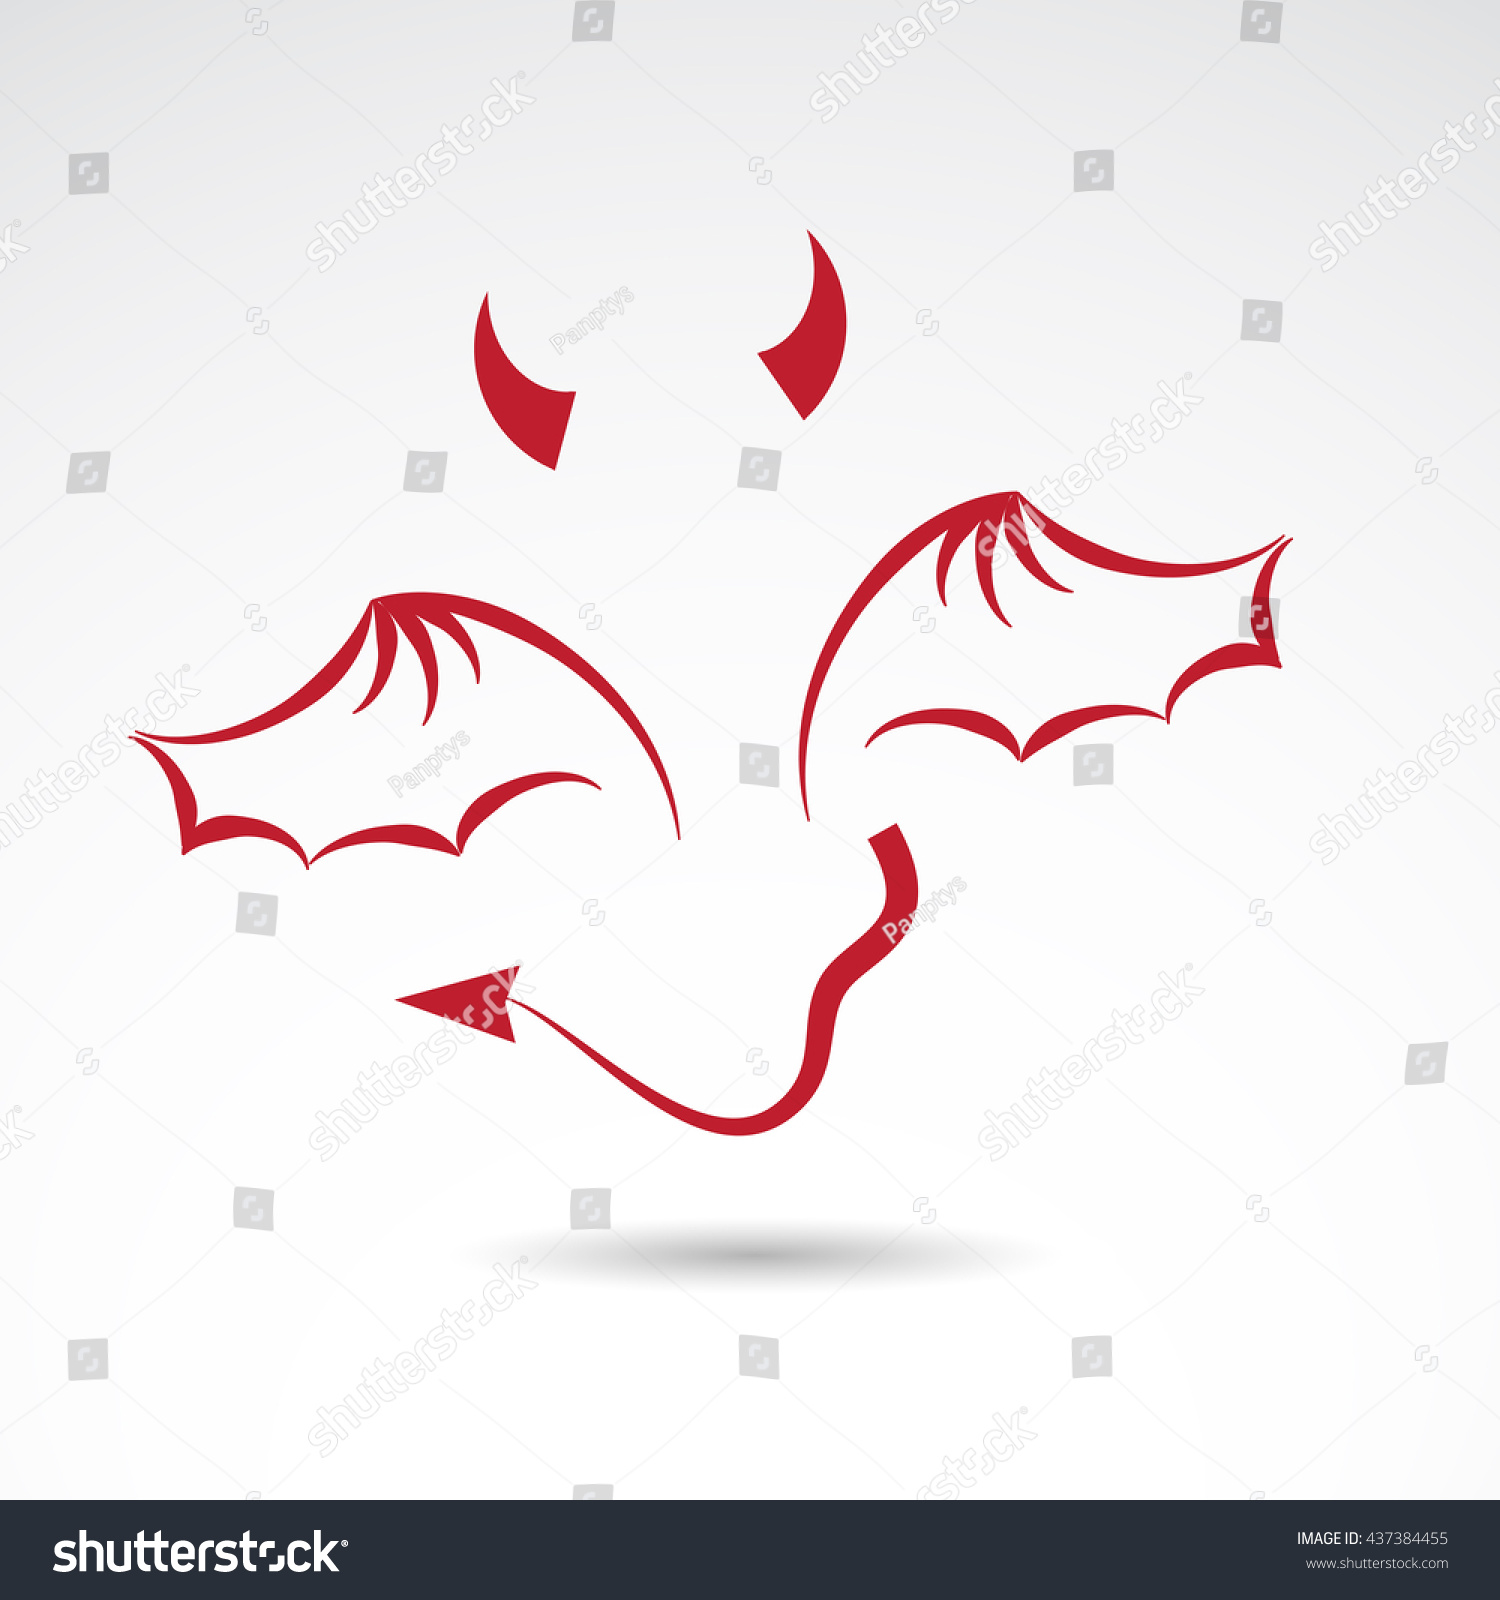 SVG of Devil icon isolated on white background. Vector art. svg